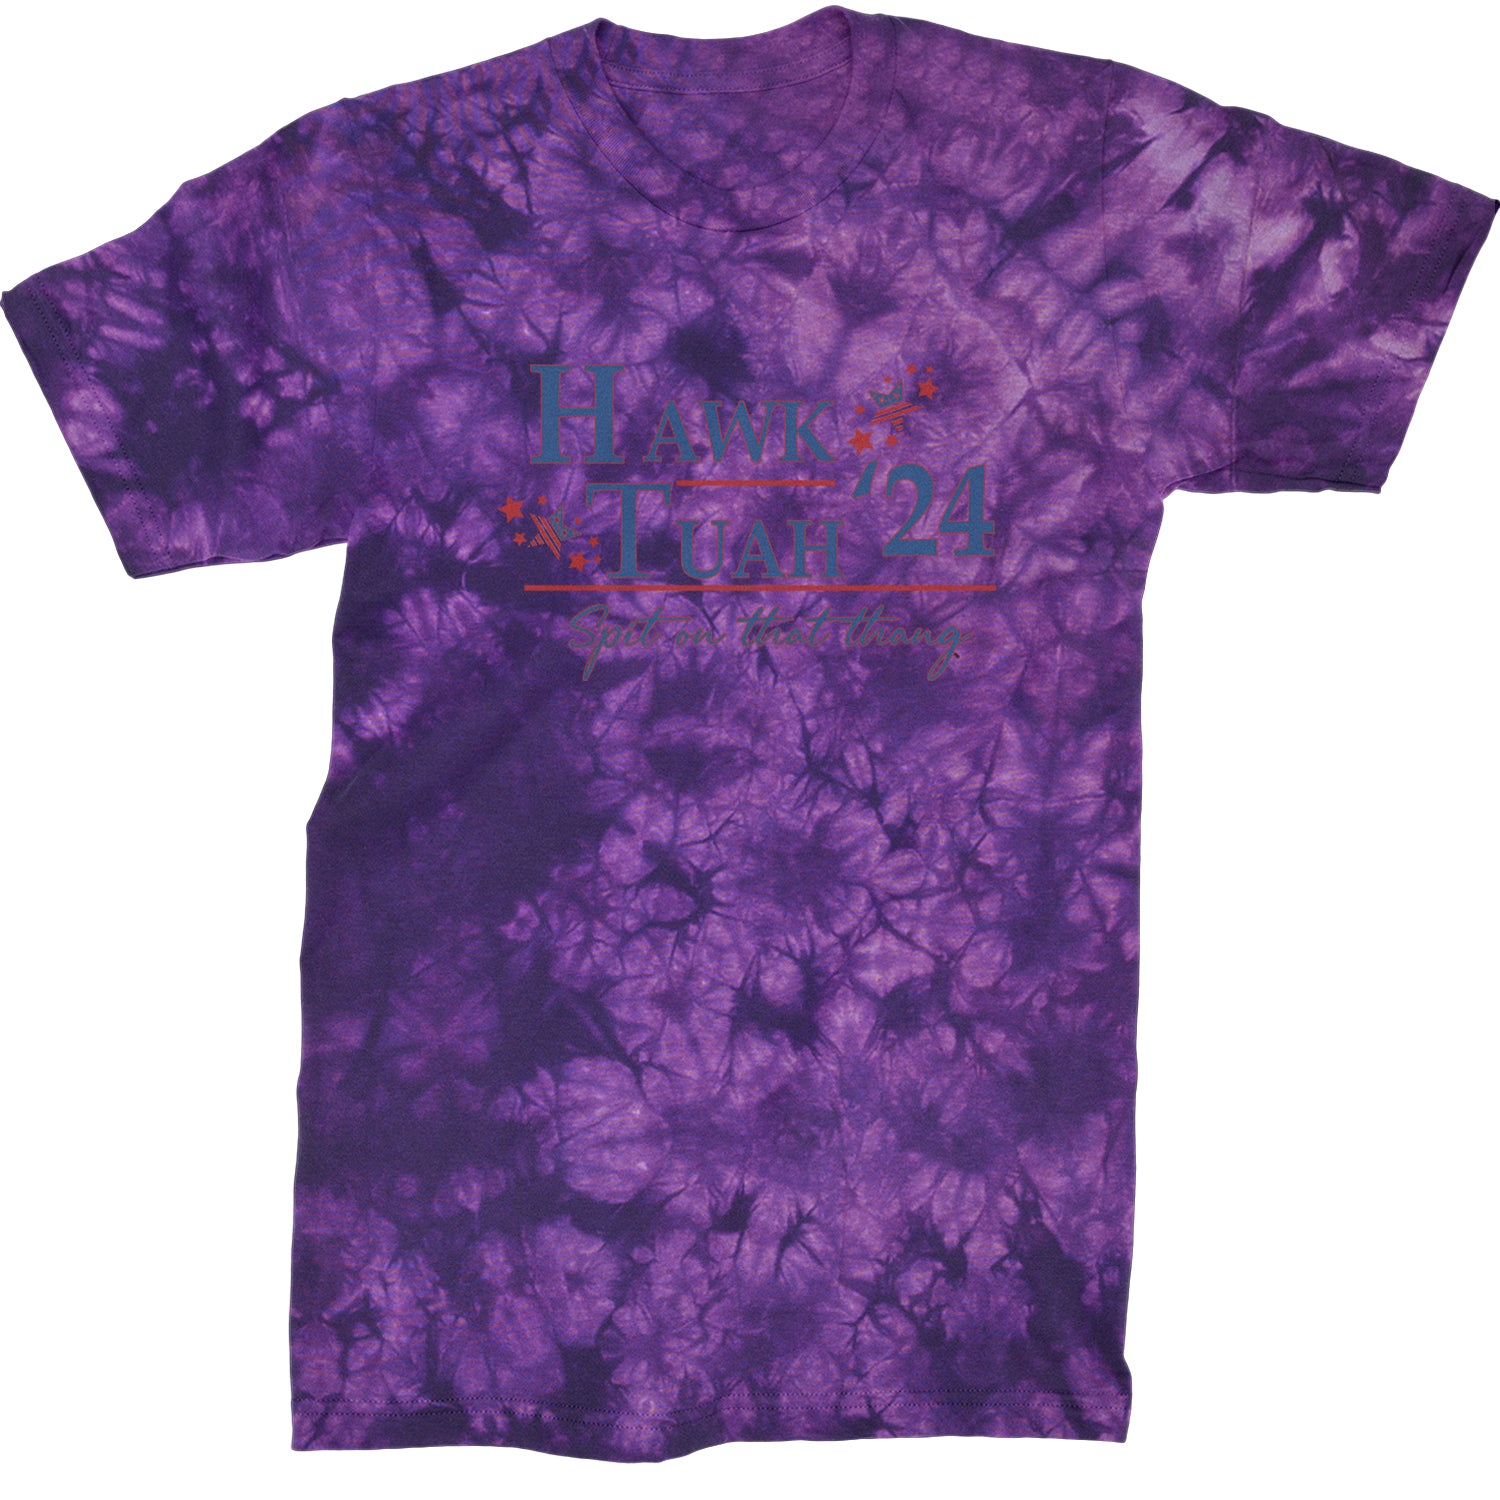 Vote For Hawk Tuah Spit On That Thang 2024 Mens T-shirt Tie-Dye Crystal Purple